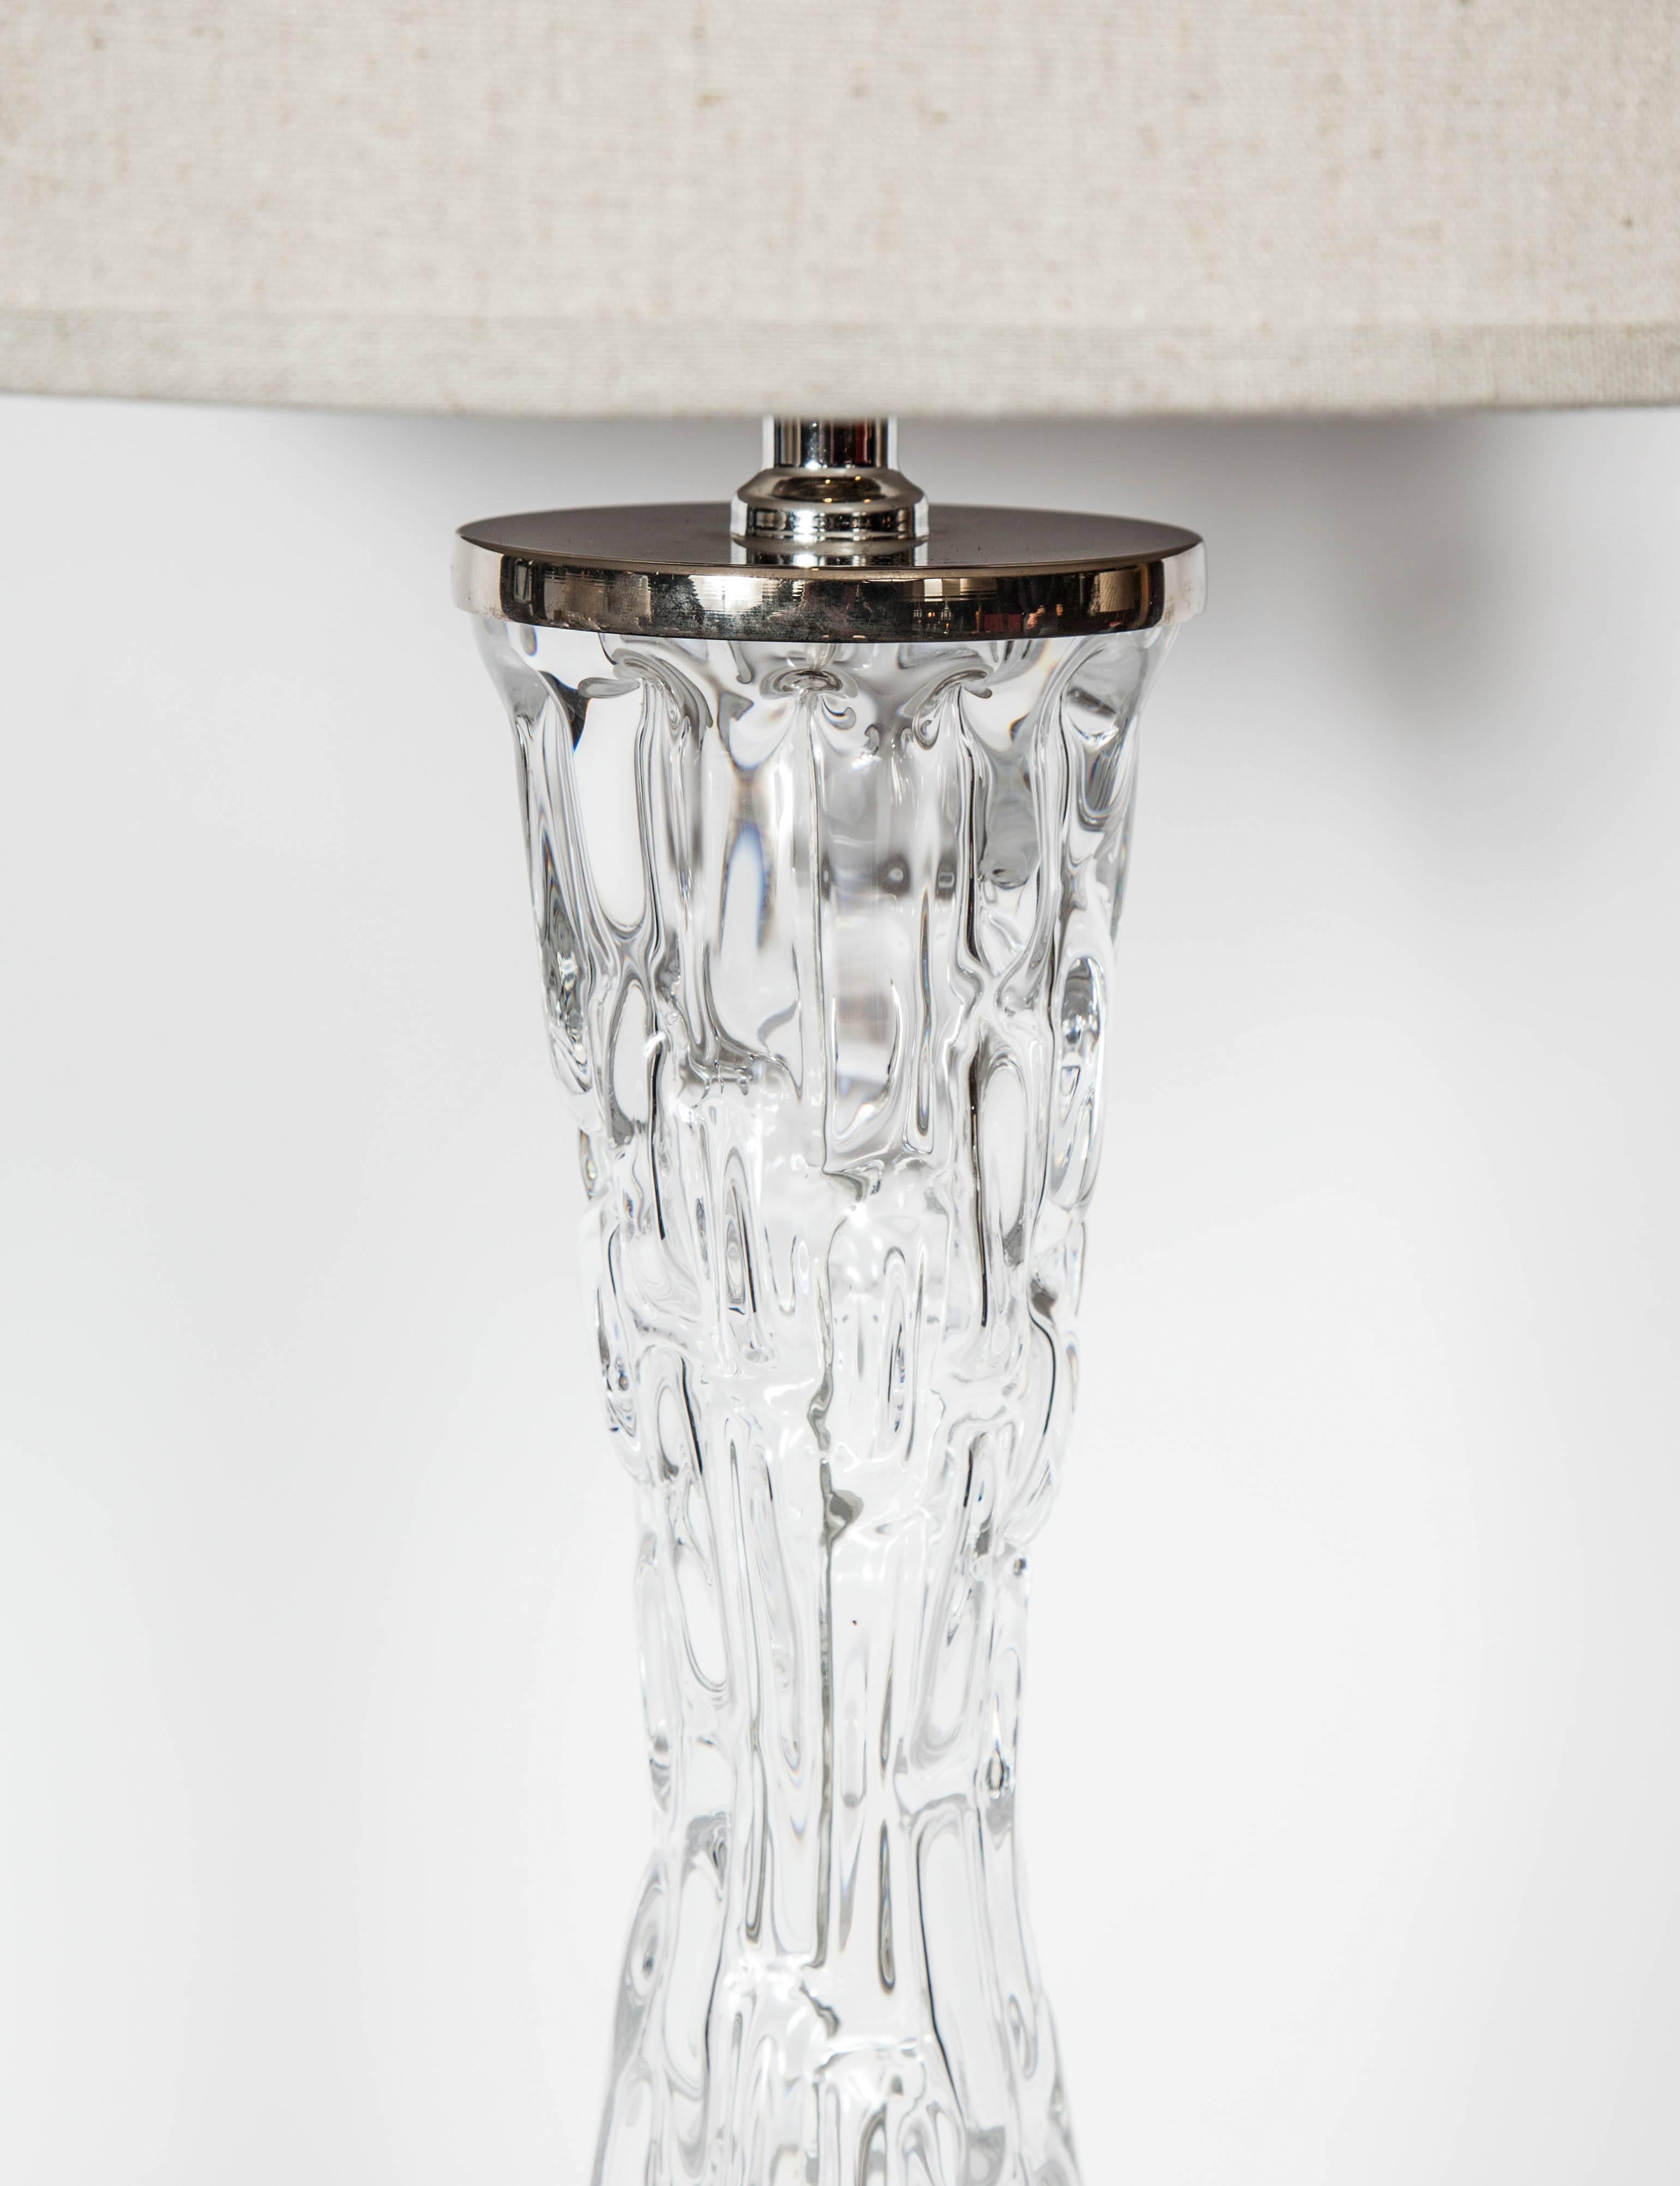 Gorgeous blown and molded glass lamp with highly stylized hourglass form. The lamp features faceted 